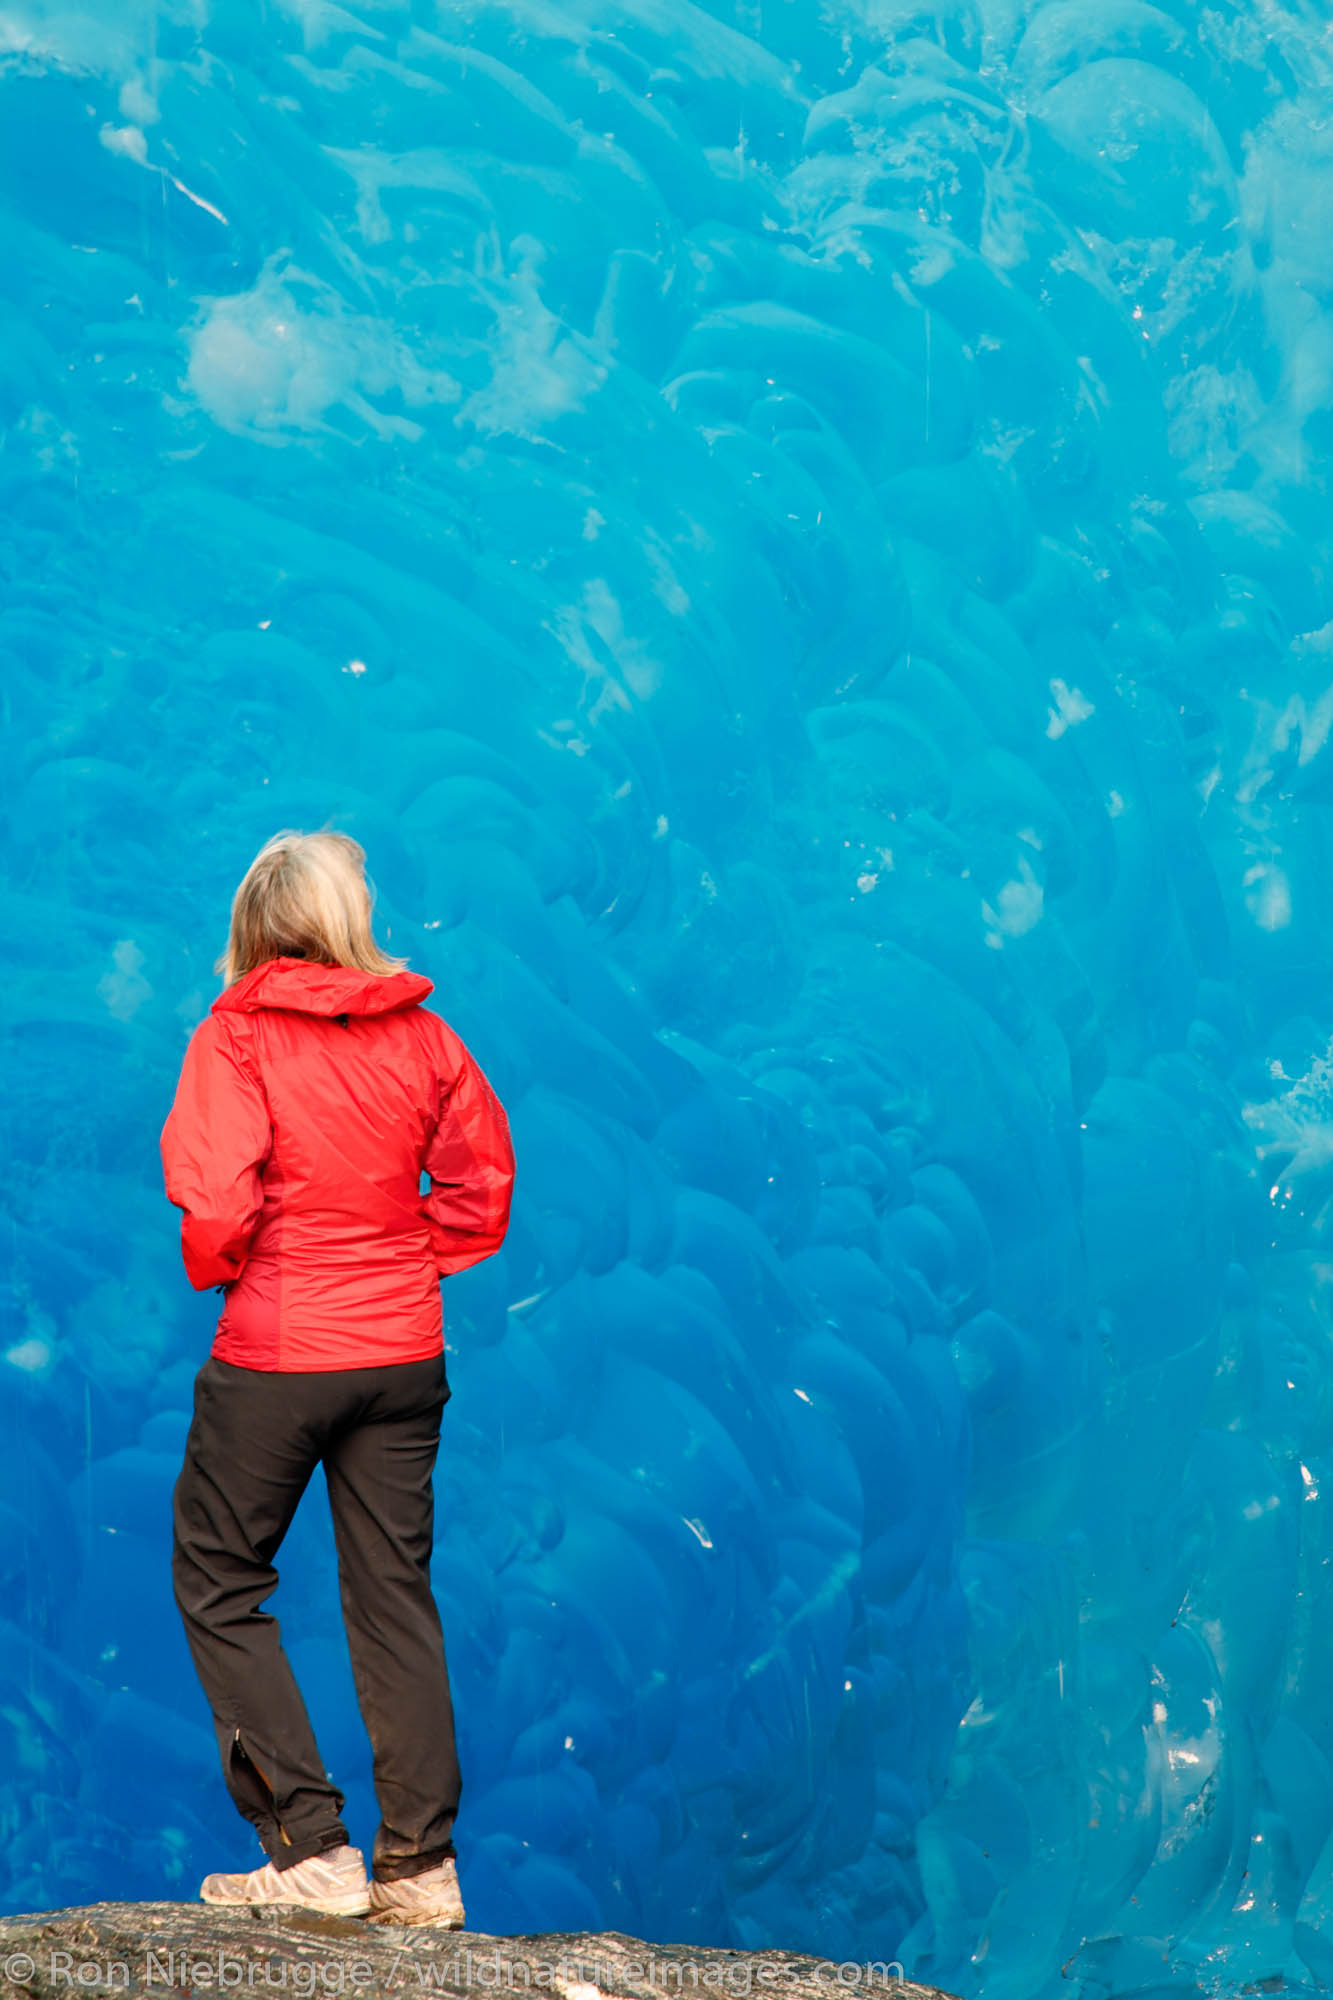 A hiker in an ice cave in Mendenhall Glacier, Juneau, Alaska.